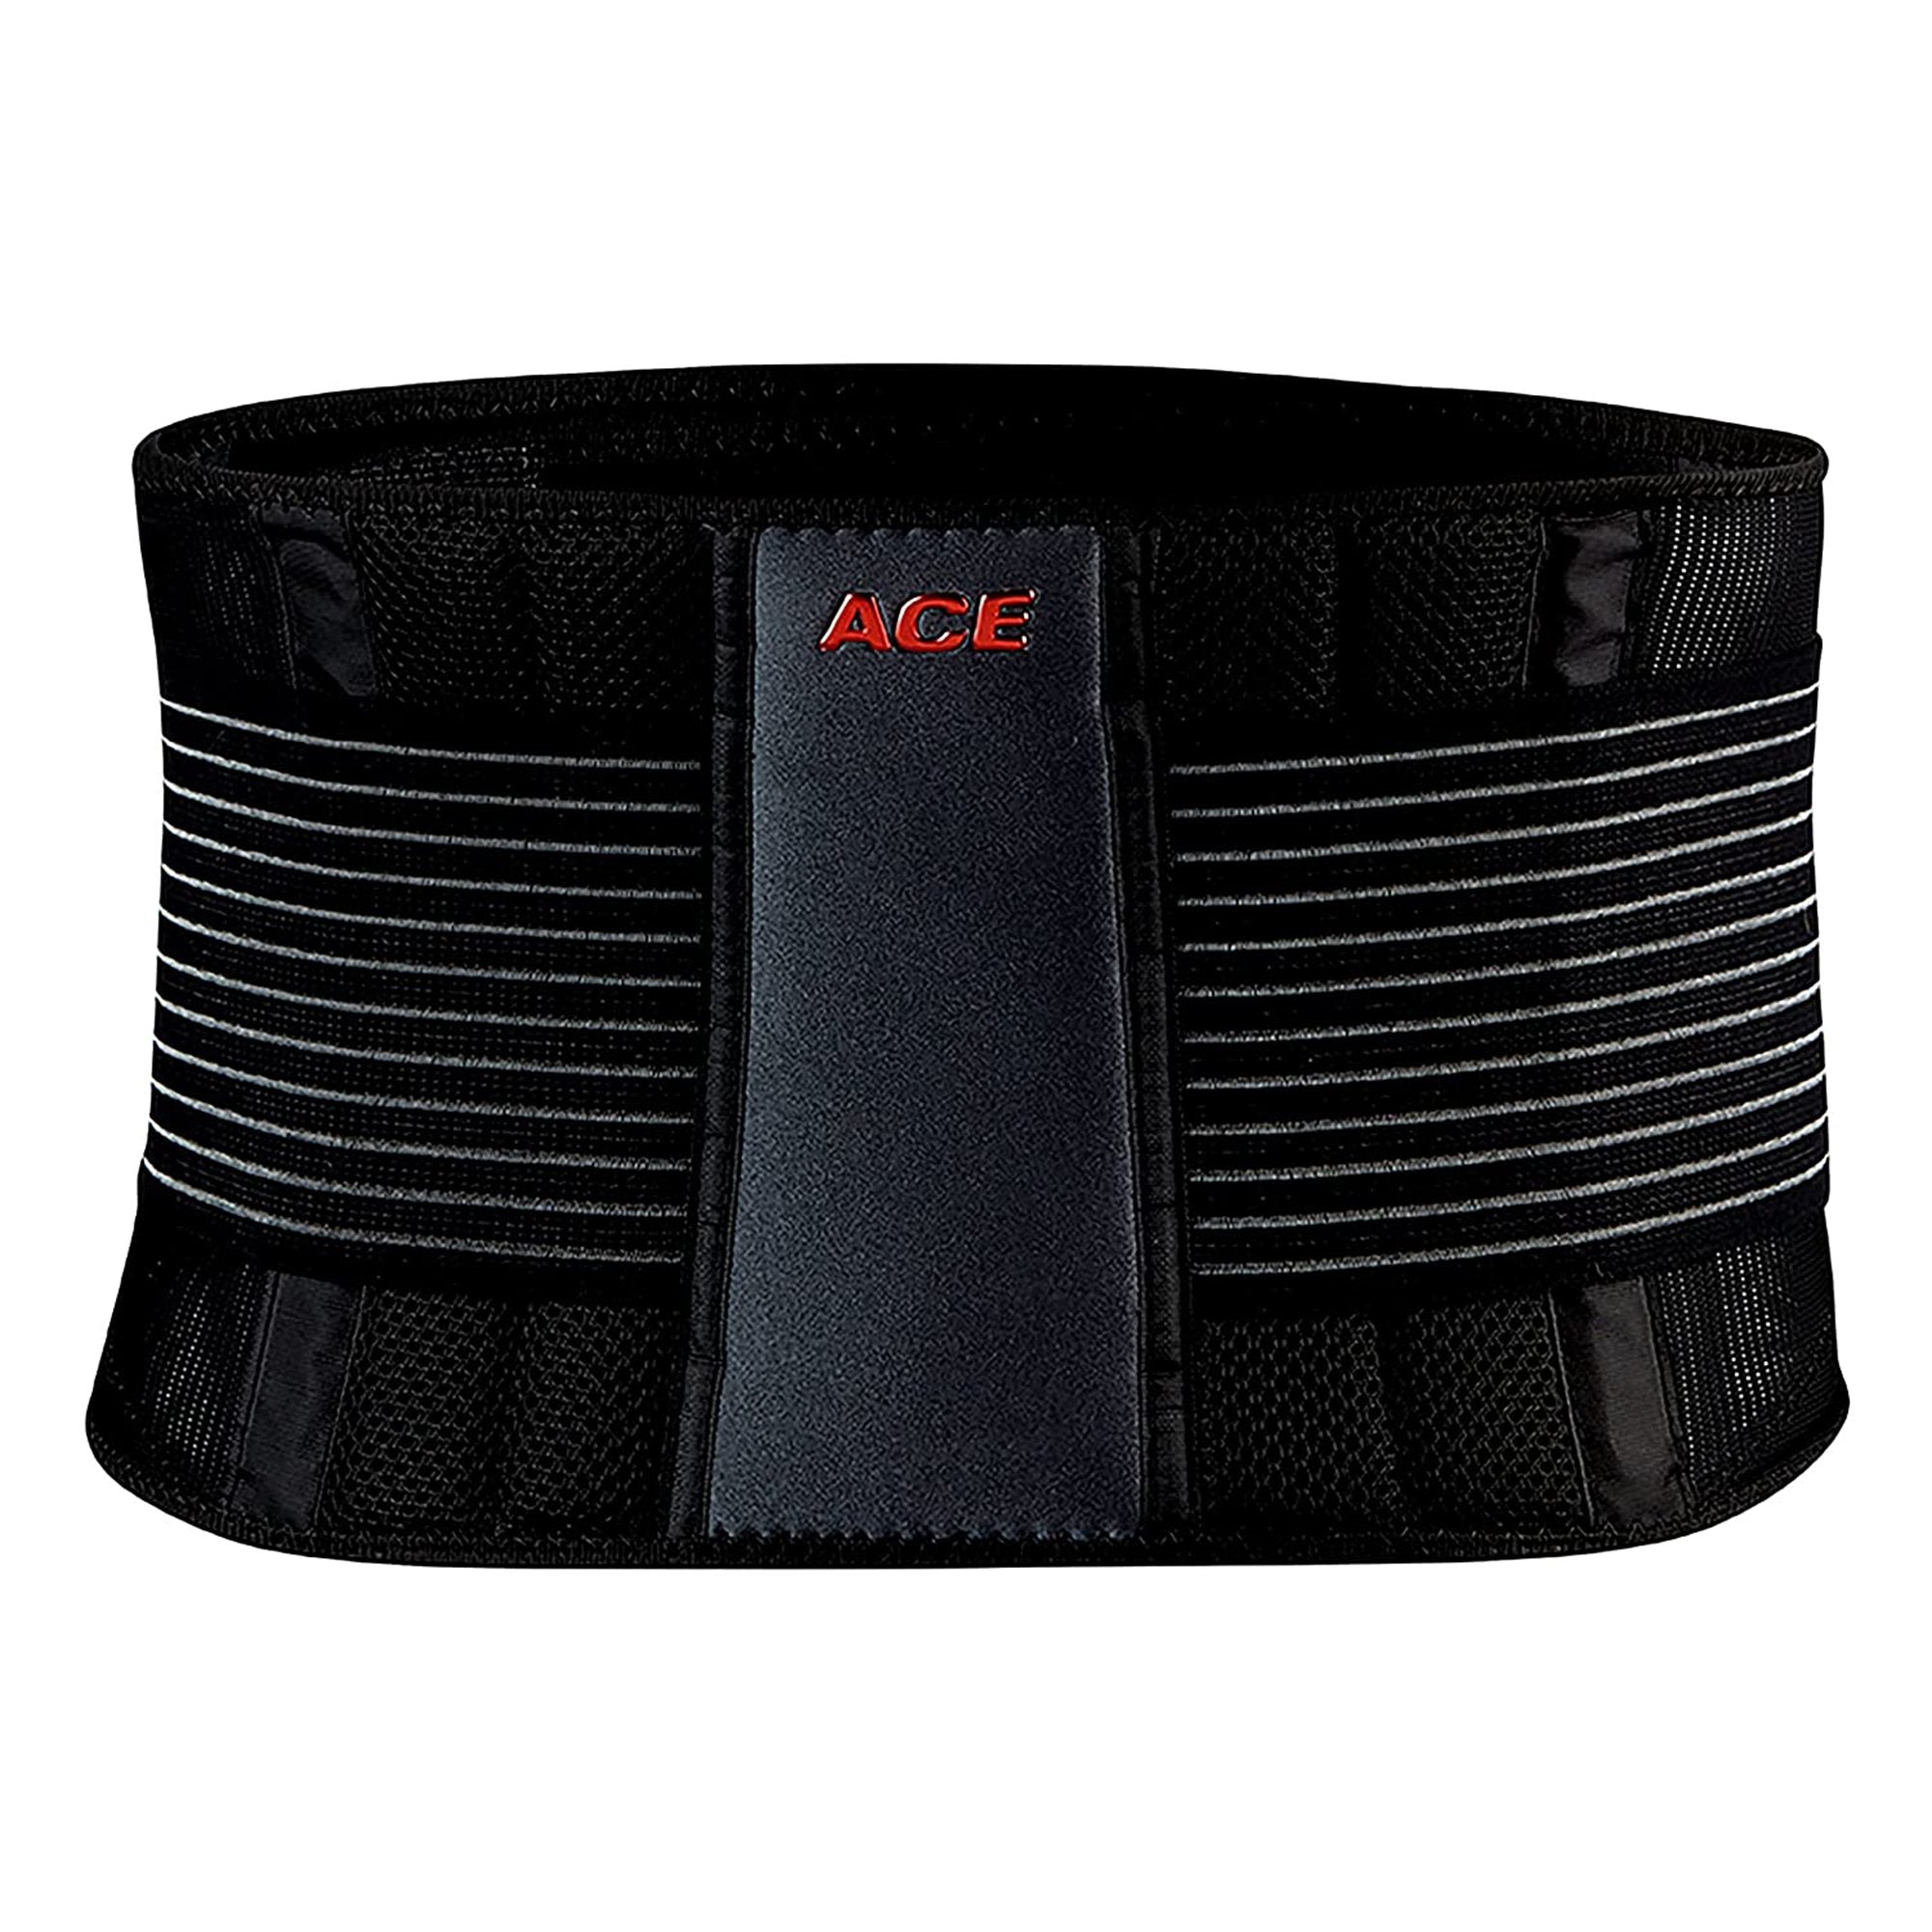 Back Support Ace One Size Fits Most Hook and Loop Closure Up to 48 Inch Waist Circumference Adult